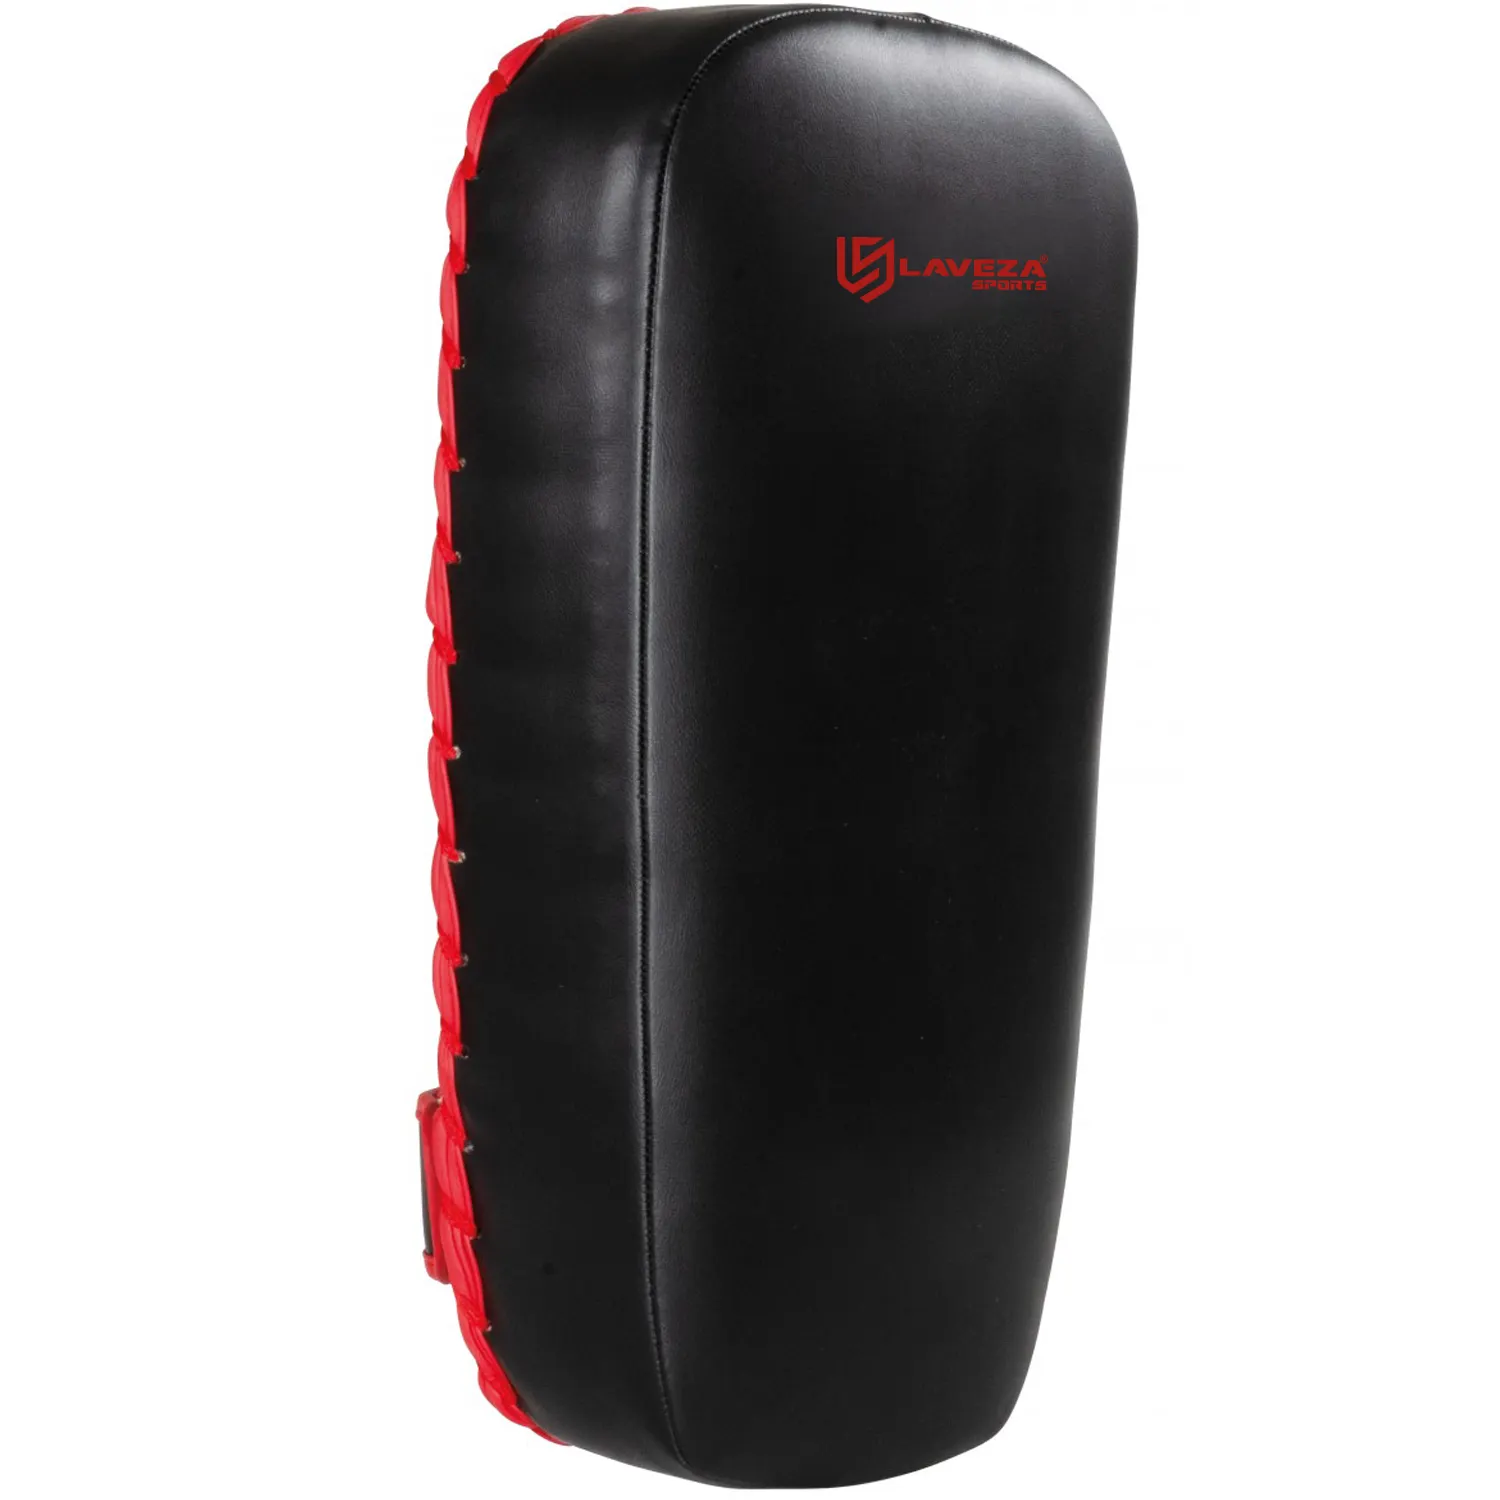 Custom Design Professional Leather Kick Boxing Pads Shield Punching MMA Focus Pads Training Curved Strike Pads Muay Thai